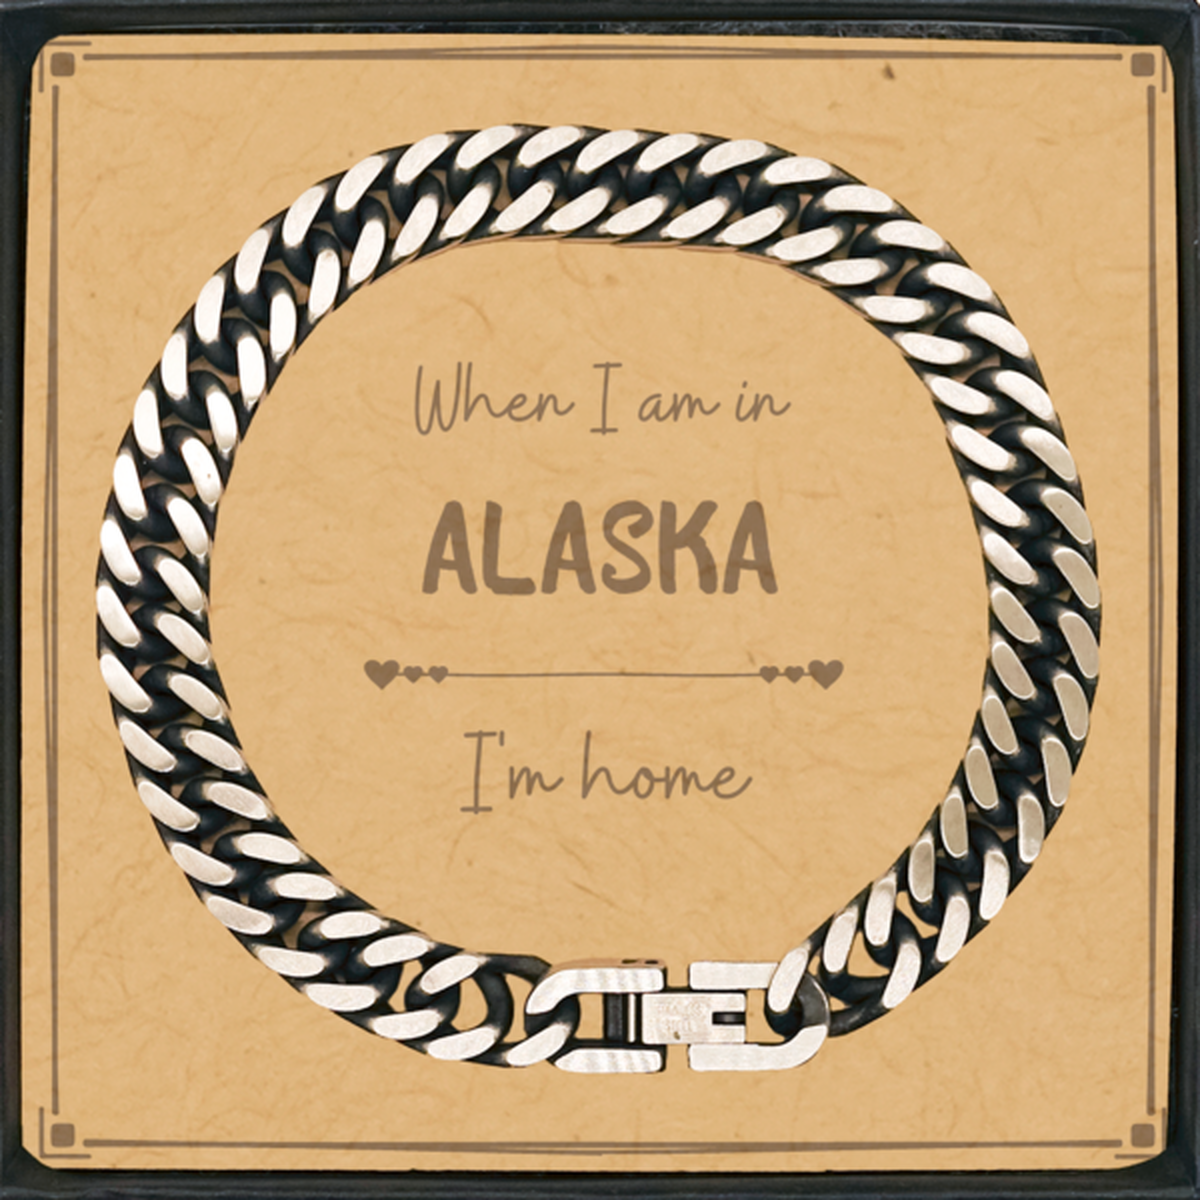 When I am in Alaska I'm home Cuban Link Chain Bracelet, Message Card Gifts For Alaska, State Alaska Birthday Gifts for Friends Coworker